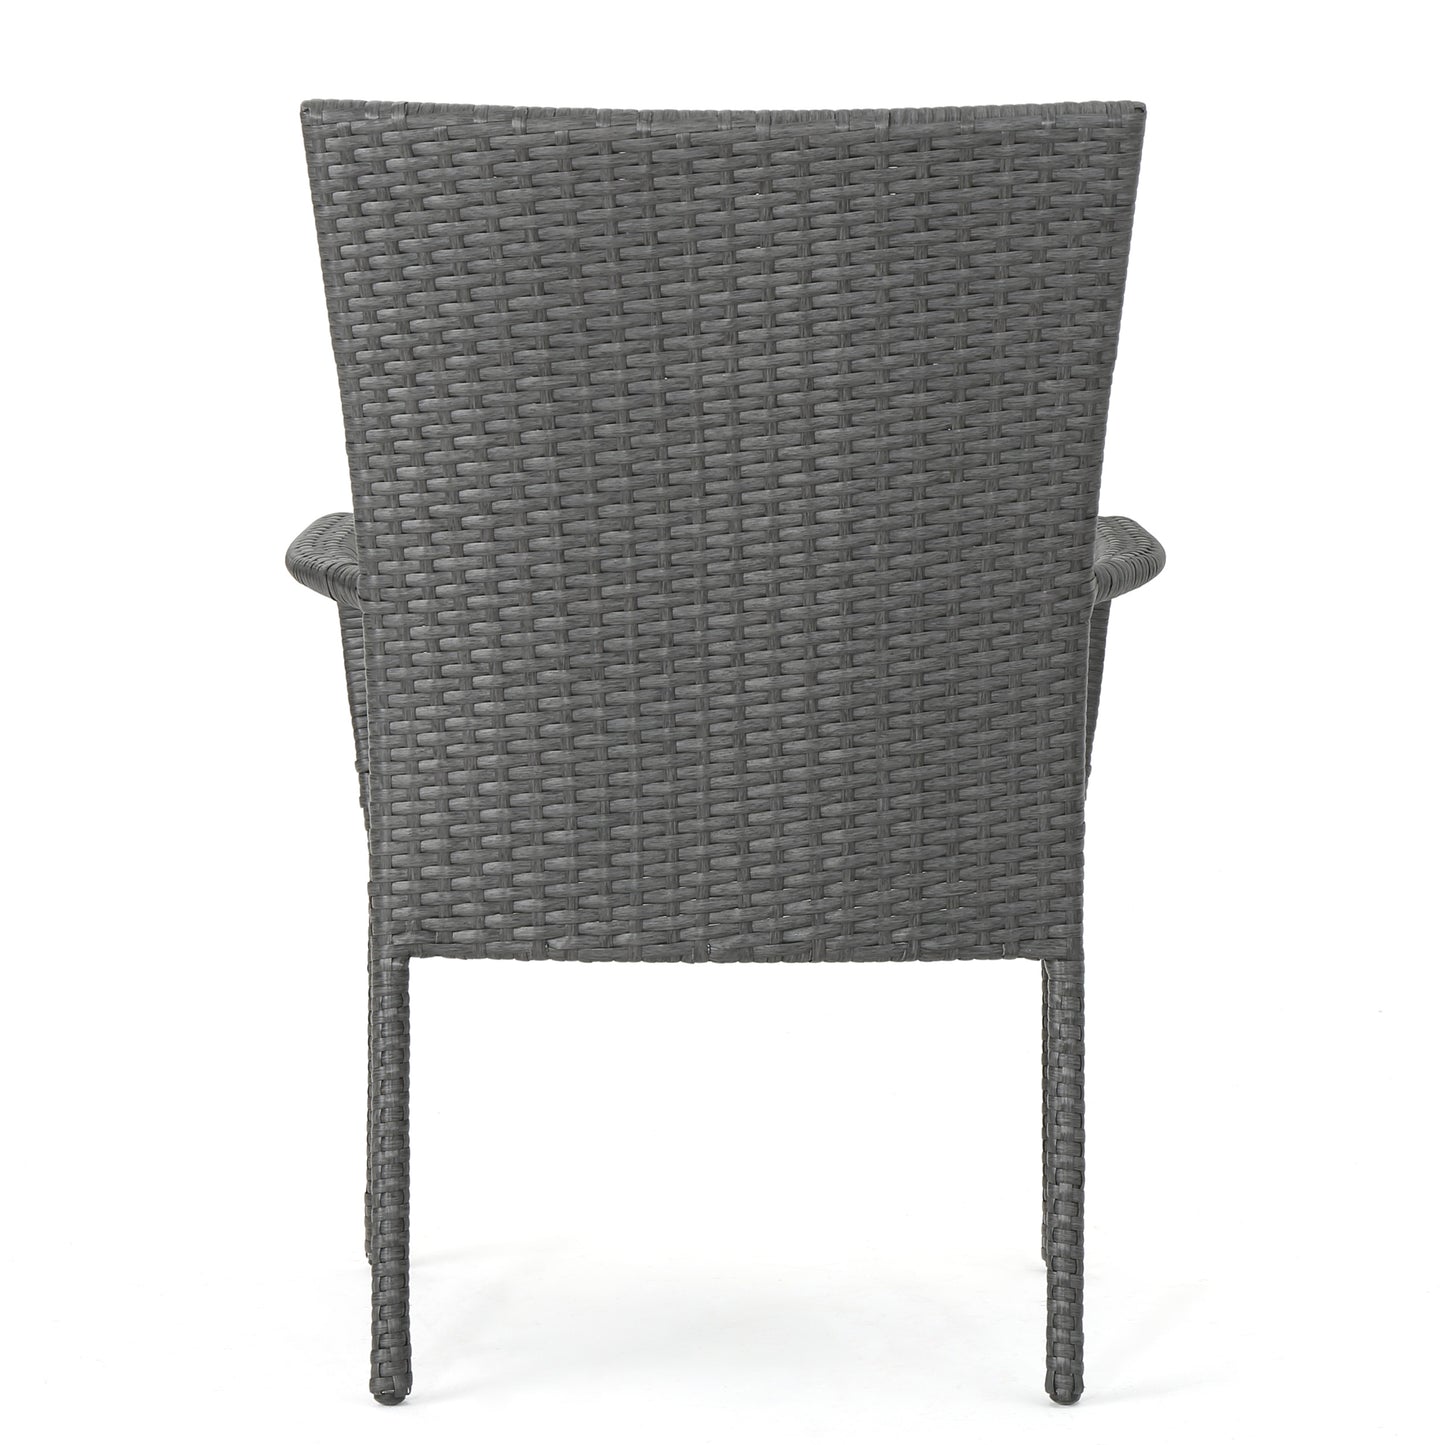 Robin Outdoor 7 Piece Wood and Wicker Dining Set, Gray and Gray